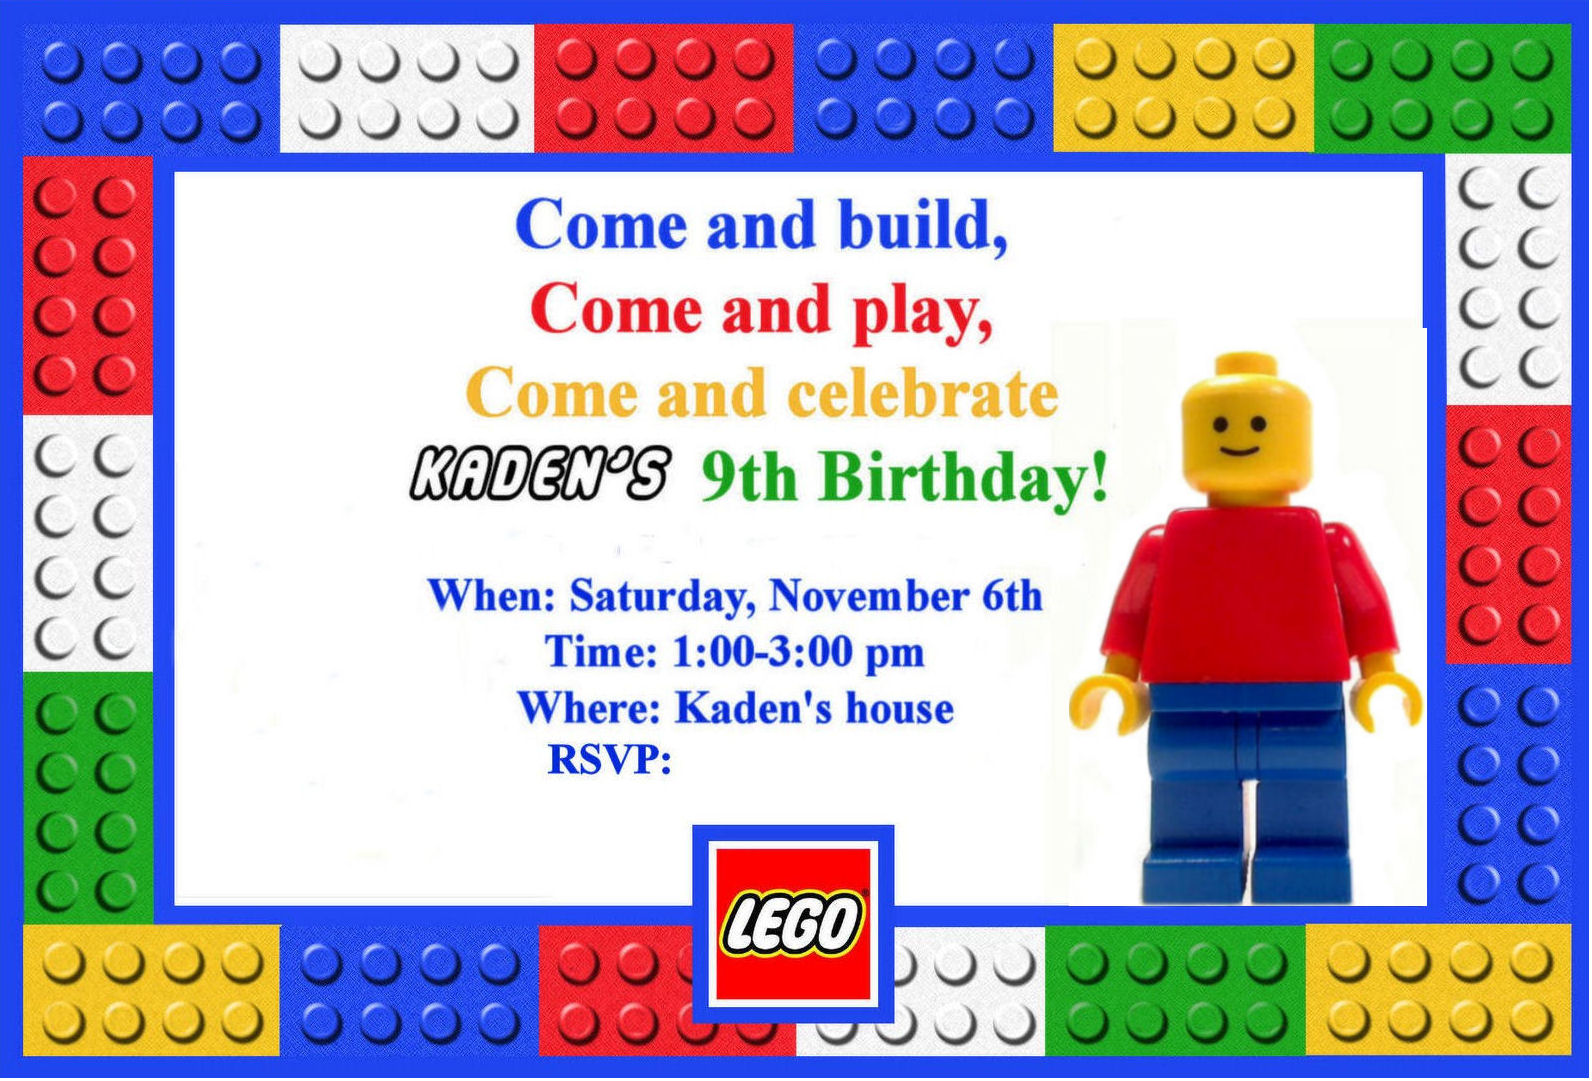 Lego clipart invitation. Free cliparts party download